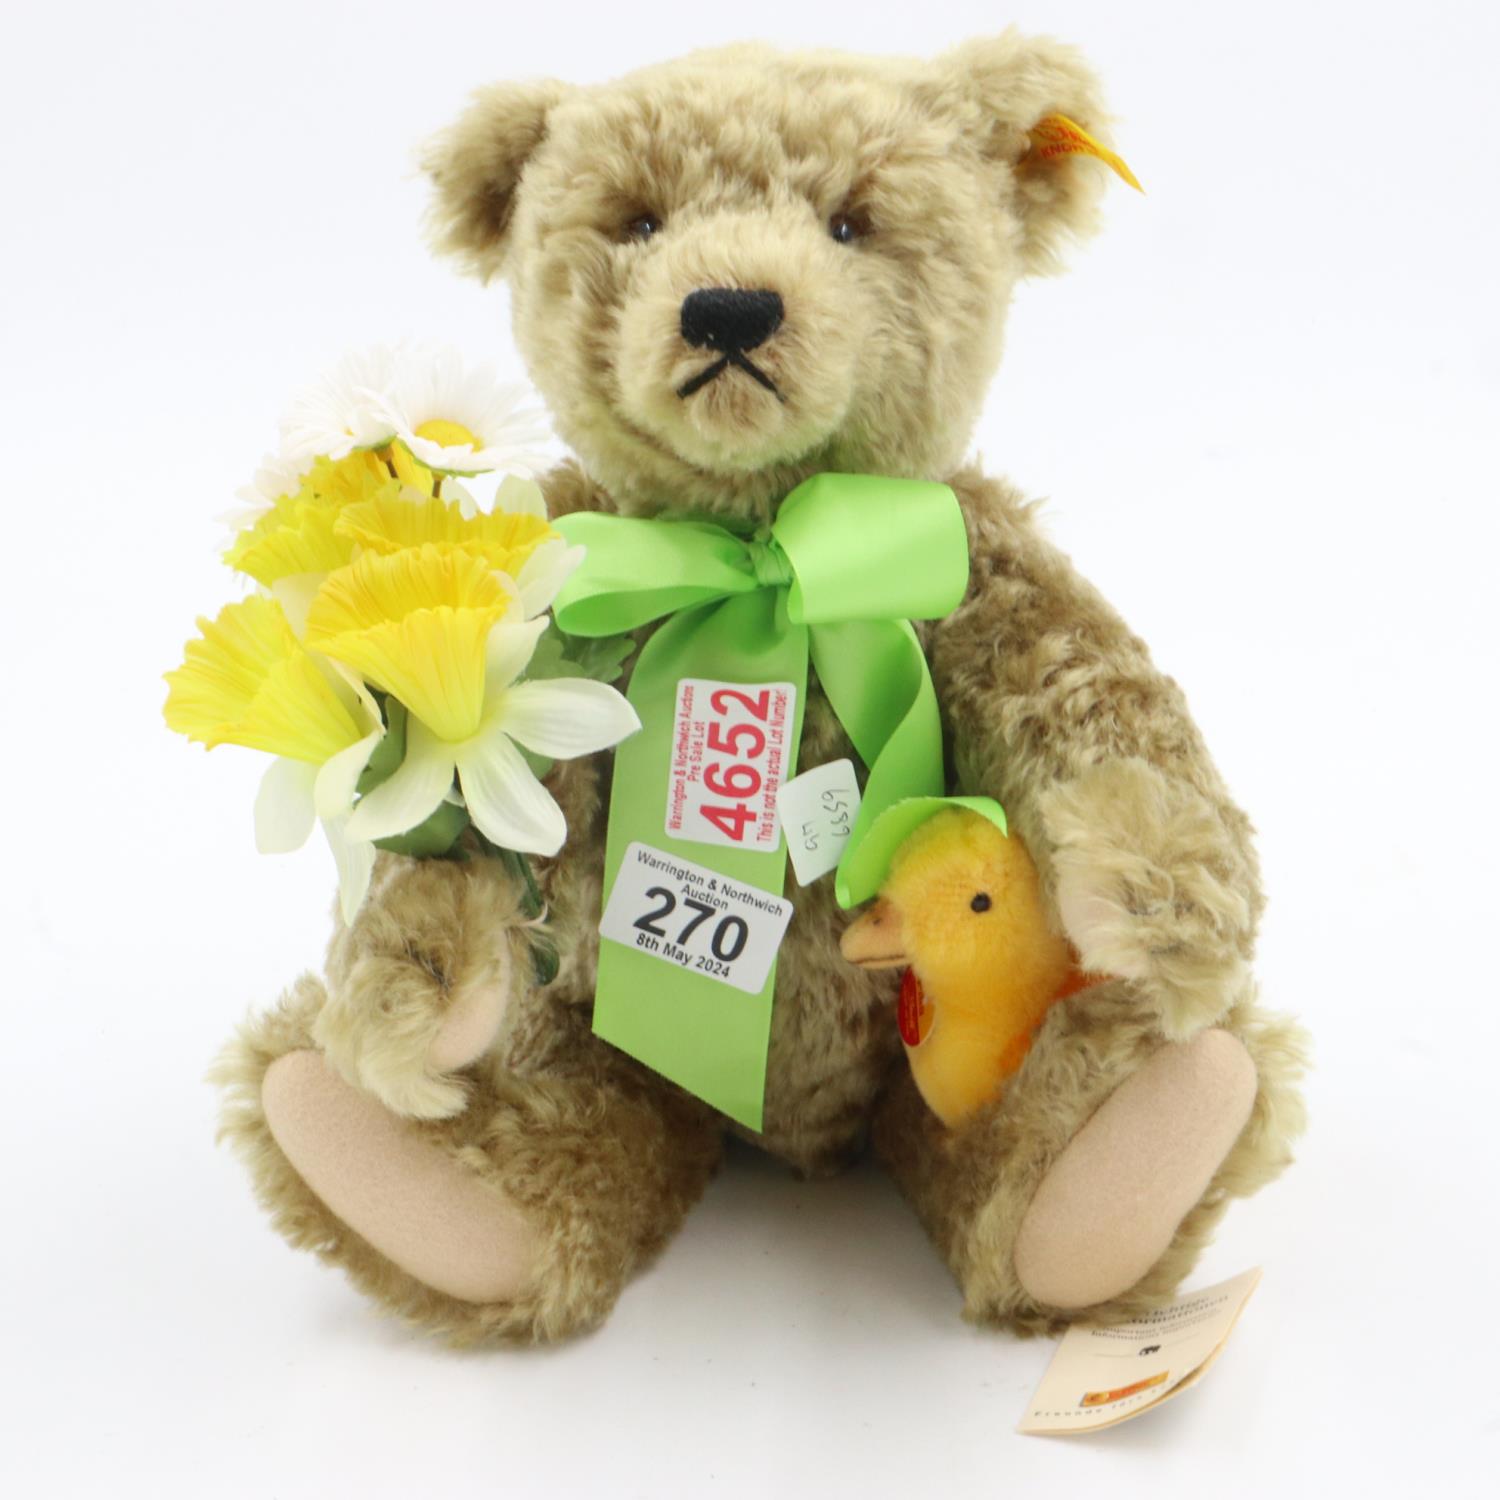 Steiff bear - Spring, H: 22 cm. Excellent condition, no tears, yellow tag/red text, flowers, duck